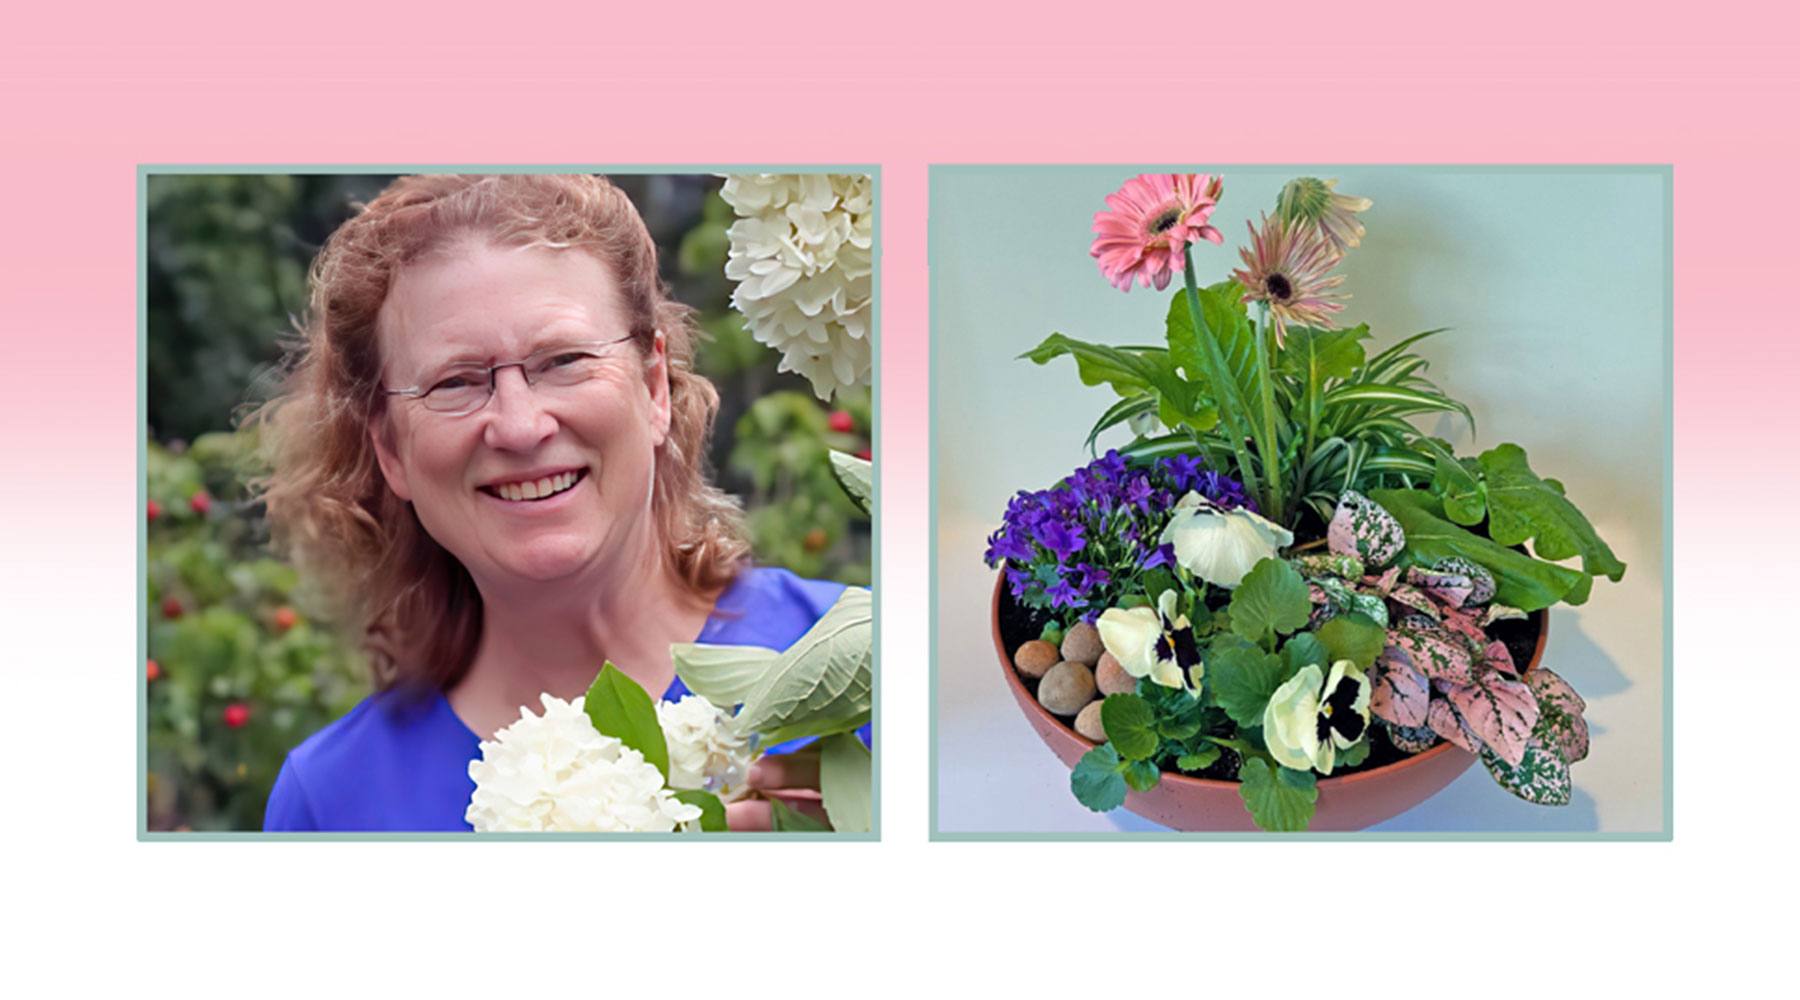 split screen of C.L. Fornari and a planted dish garden